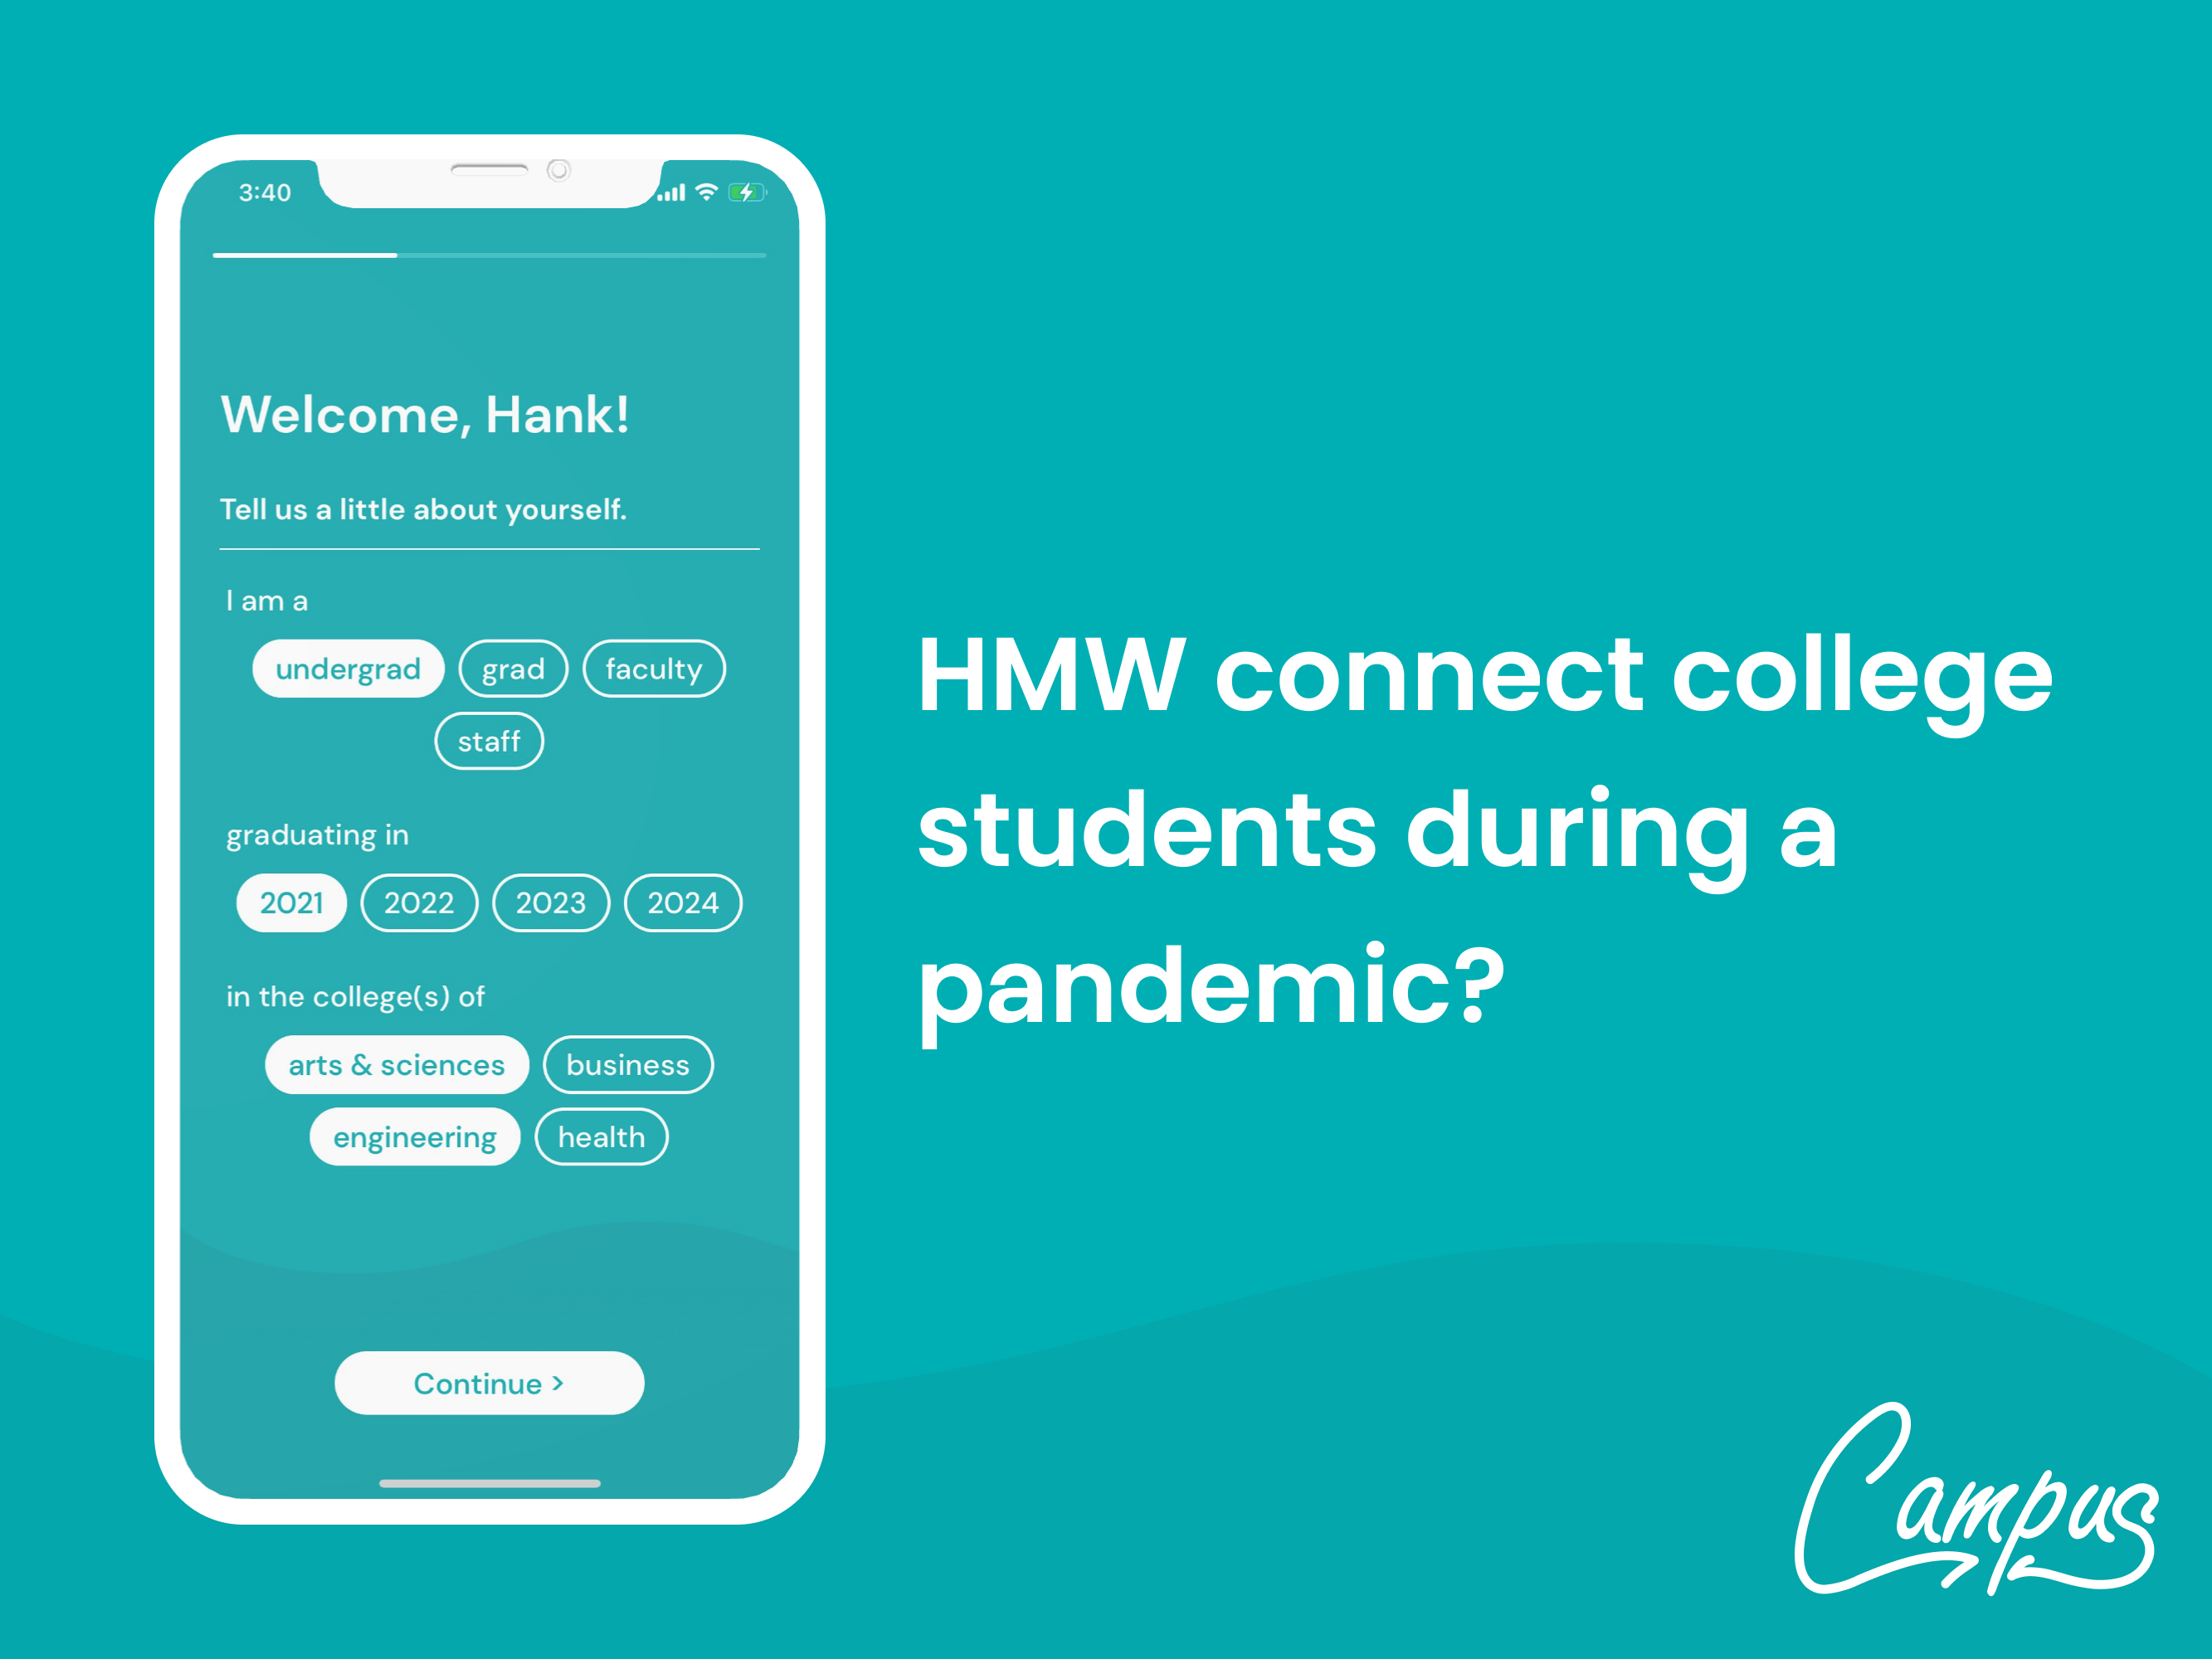 Campus app user interface with text: 'HMW Connect college students during a pandemic?'